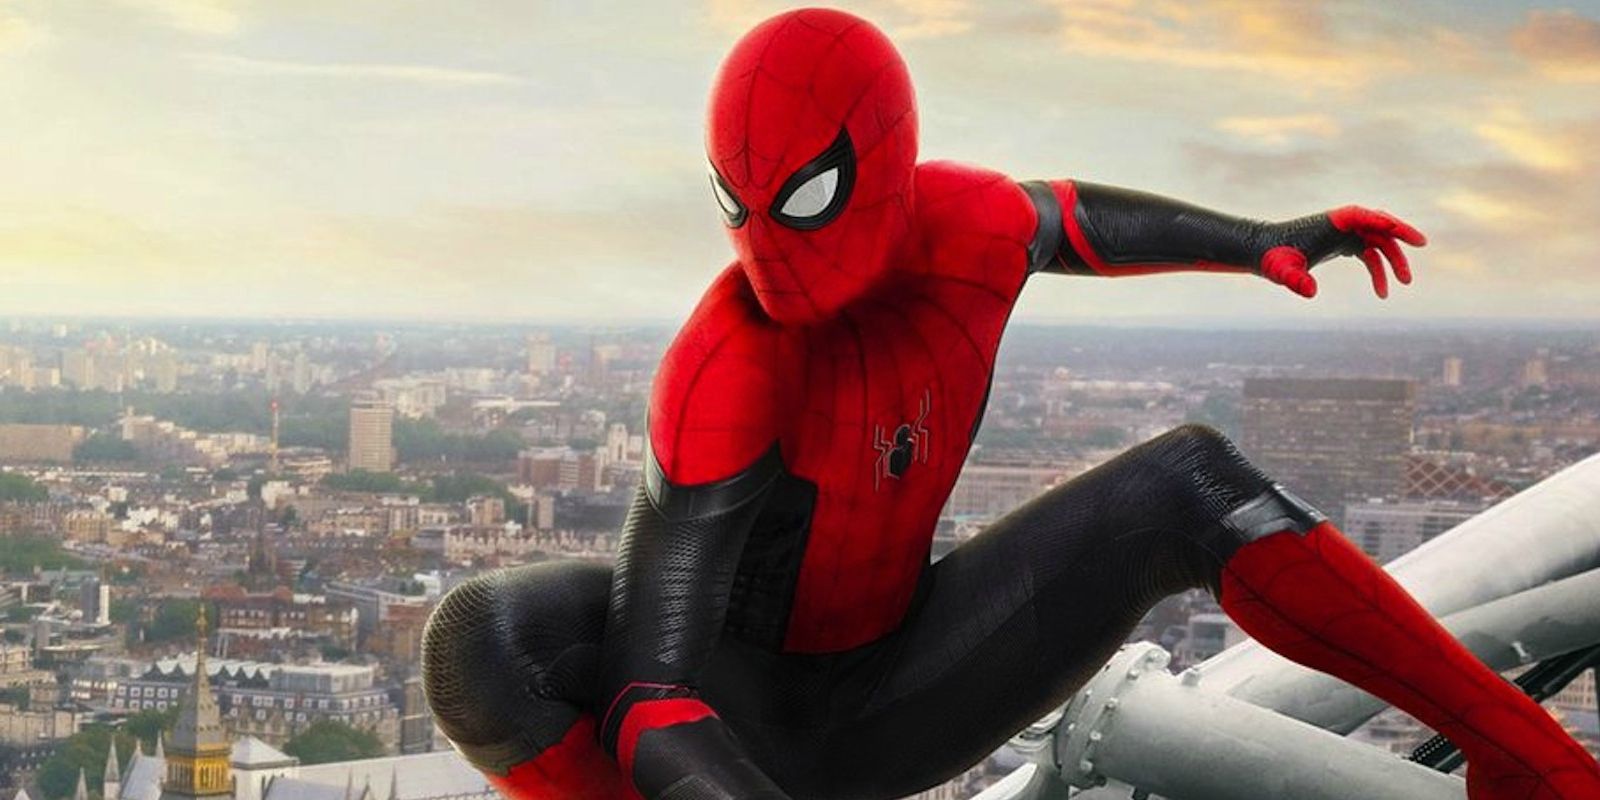 Tom Holland as Spider-Man in Spider-Man Far From Home